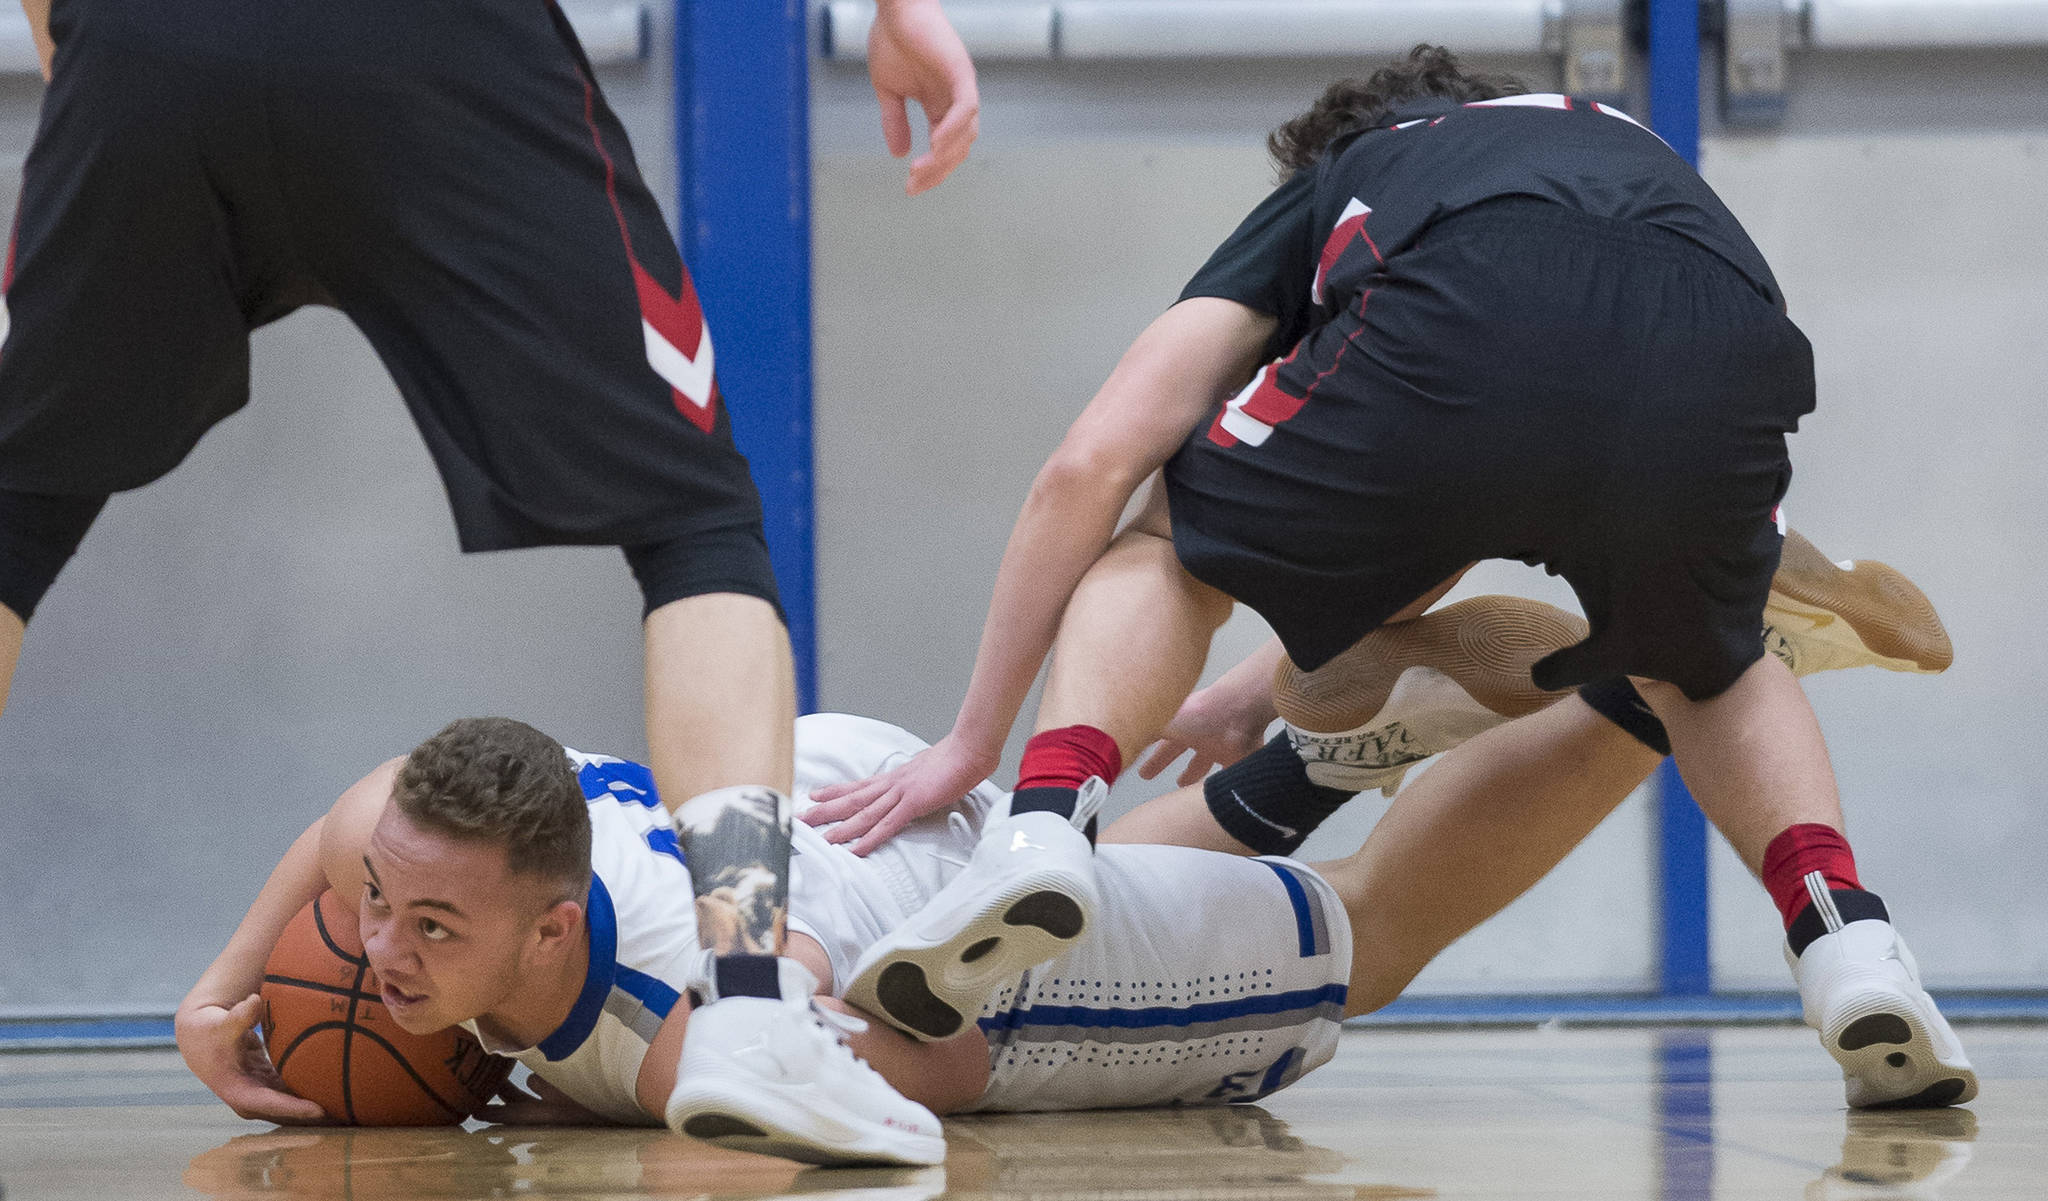 Thunder Mountain’s Vaipuna Toutaiolepo dives for a loose ball against Juneau-Douglas’ Cooper Kriegmont during their game at TMHS on Friday, Jan. 5, 2017. TMHS won 50-45.